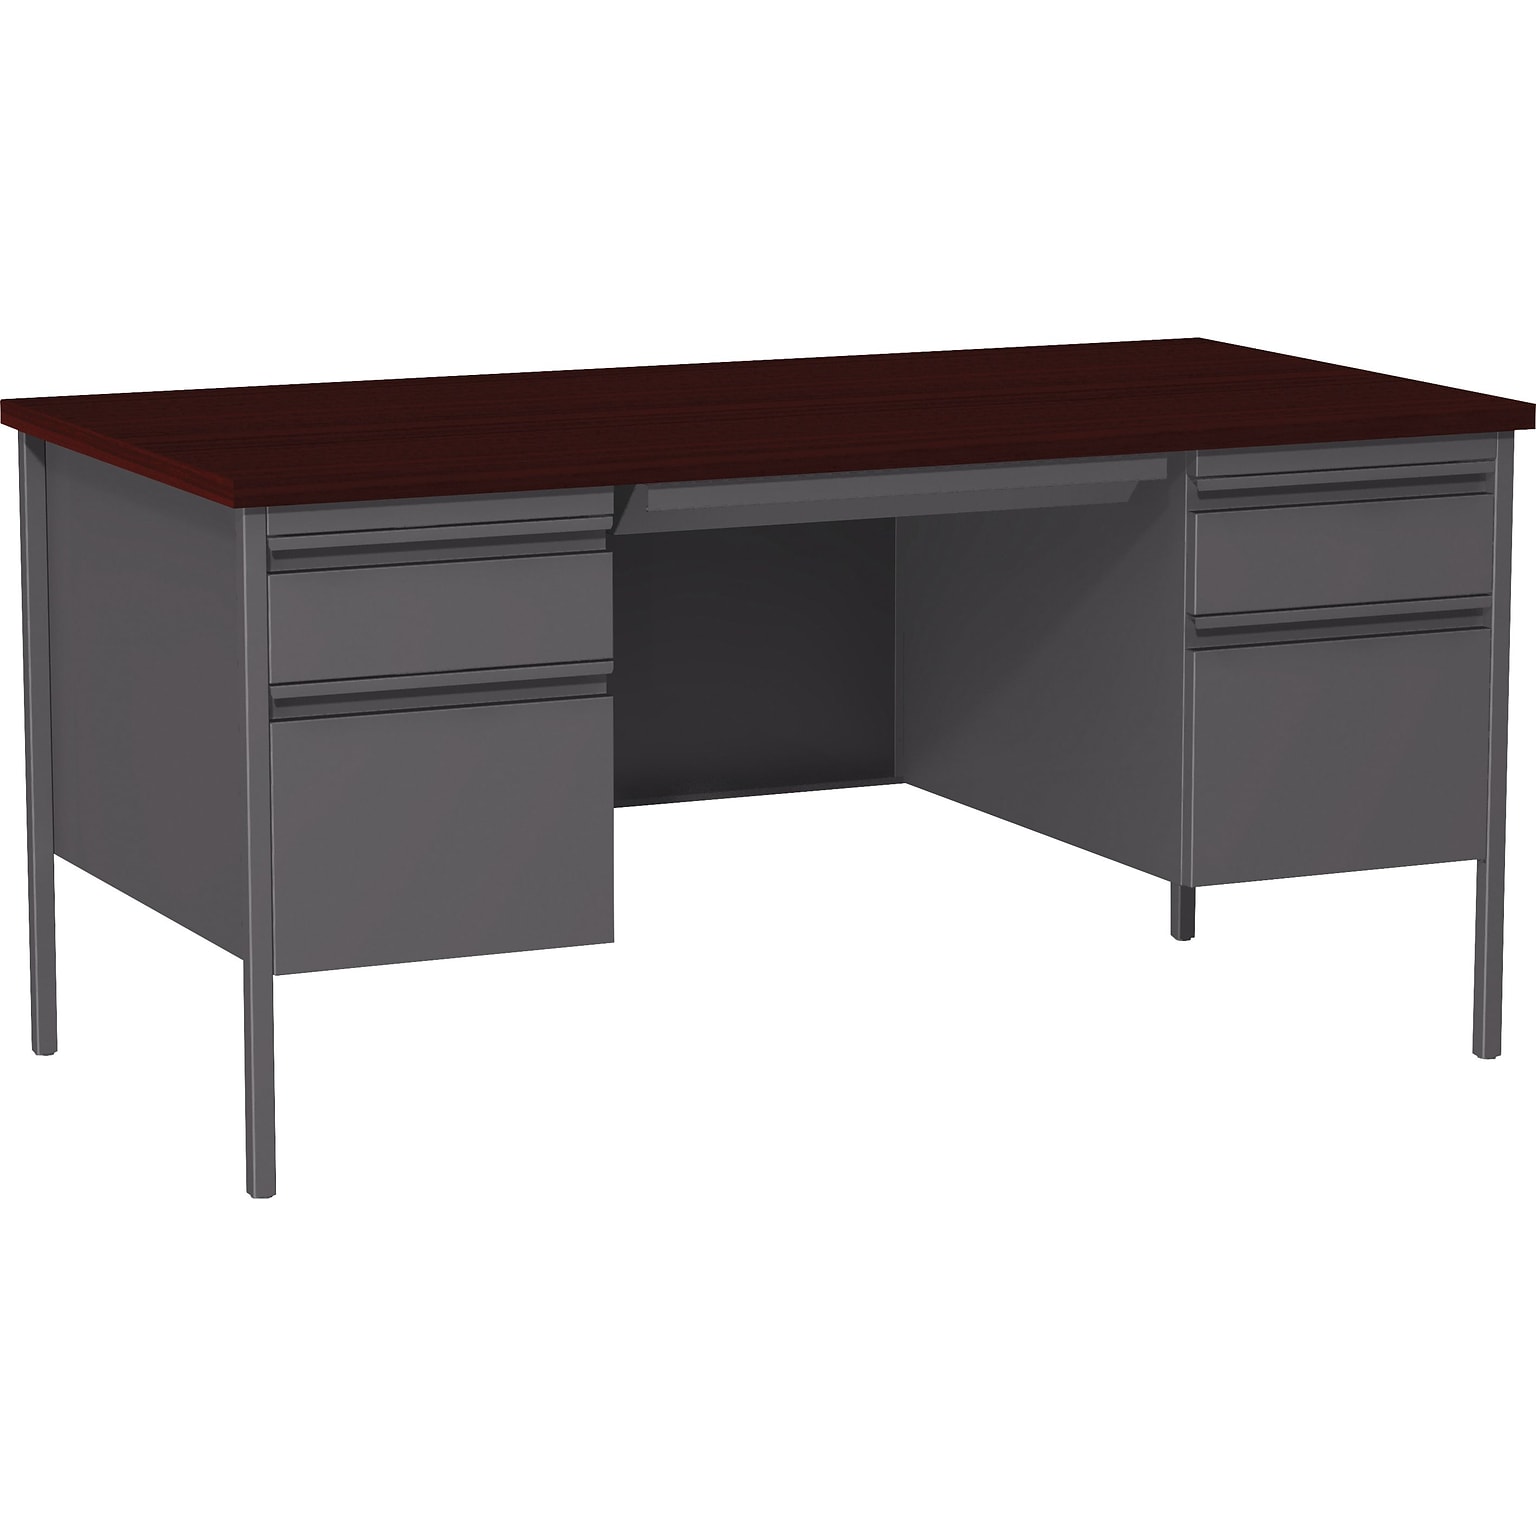 Quill Brand® 60W Mahogany Laminate Fortress Series Desk with Double Pedestal